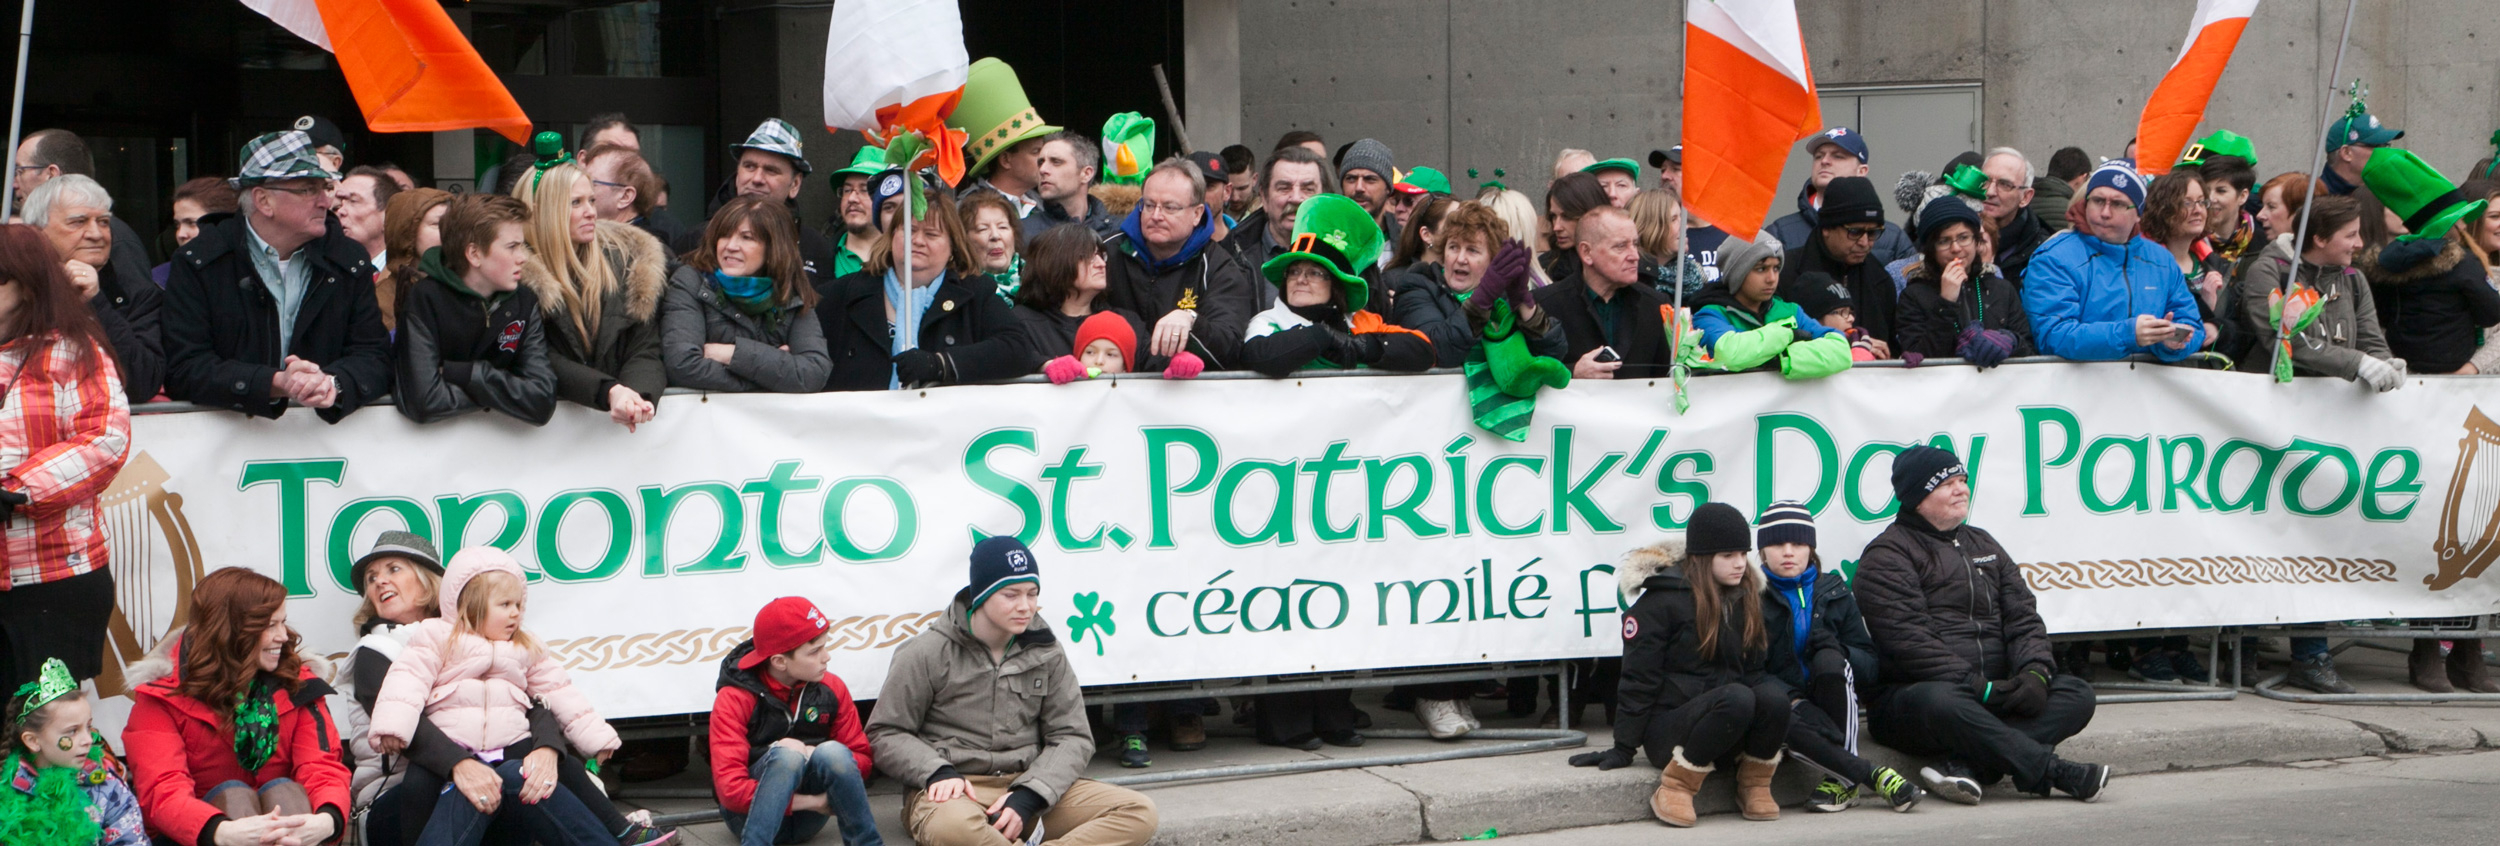 5 East-Side Bars/Pubs to Visit This St. Patrick’s Day!